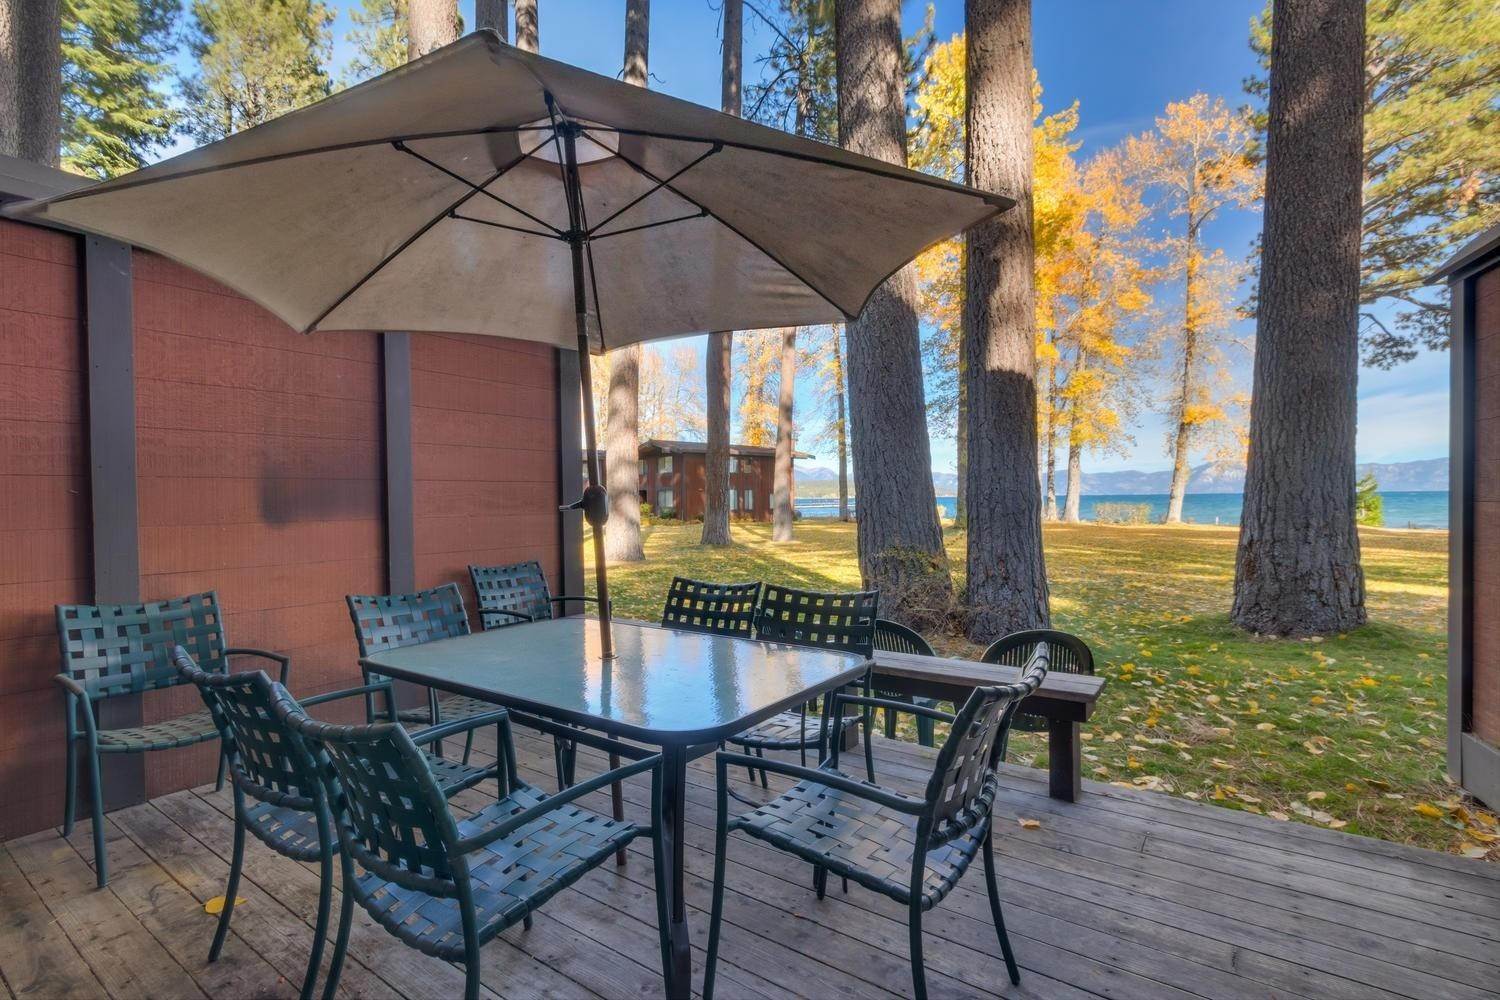 3. Condo / Townhouse at 180 West Lake Boulevard Tahoe City, California 96145 United States